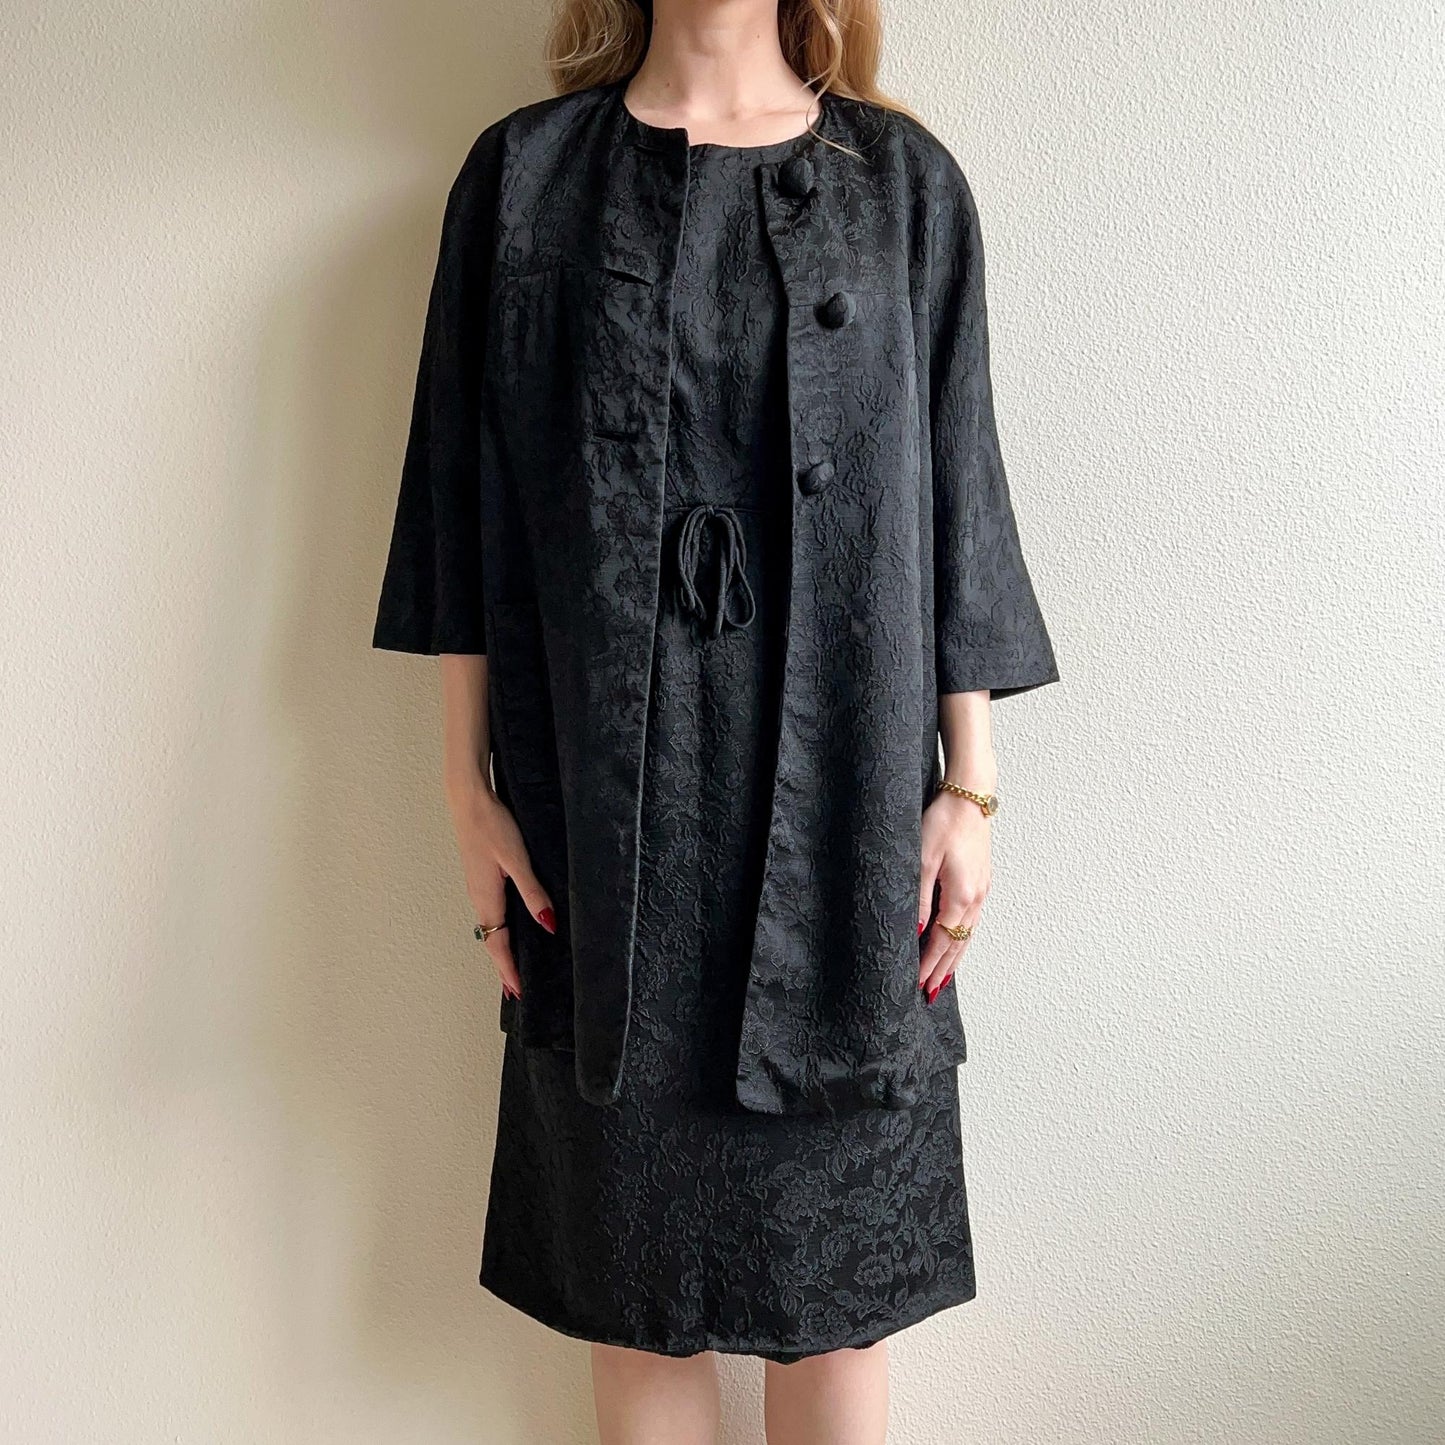 1960s Black Floral Sheath Dress With Matching Coat (S/M)